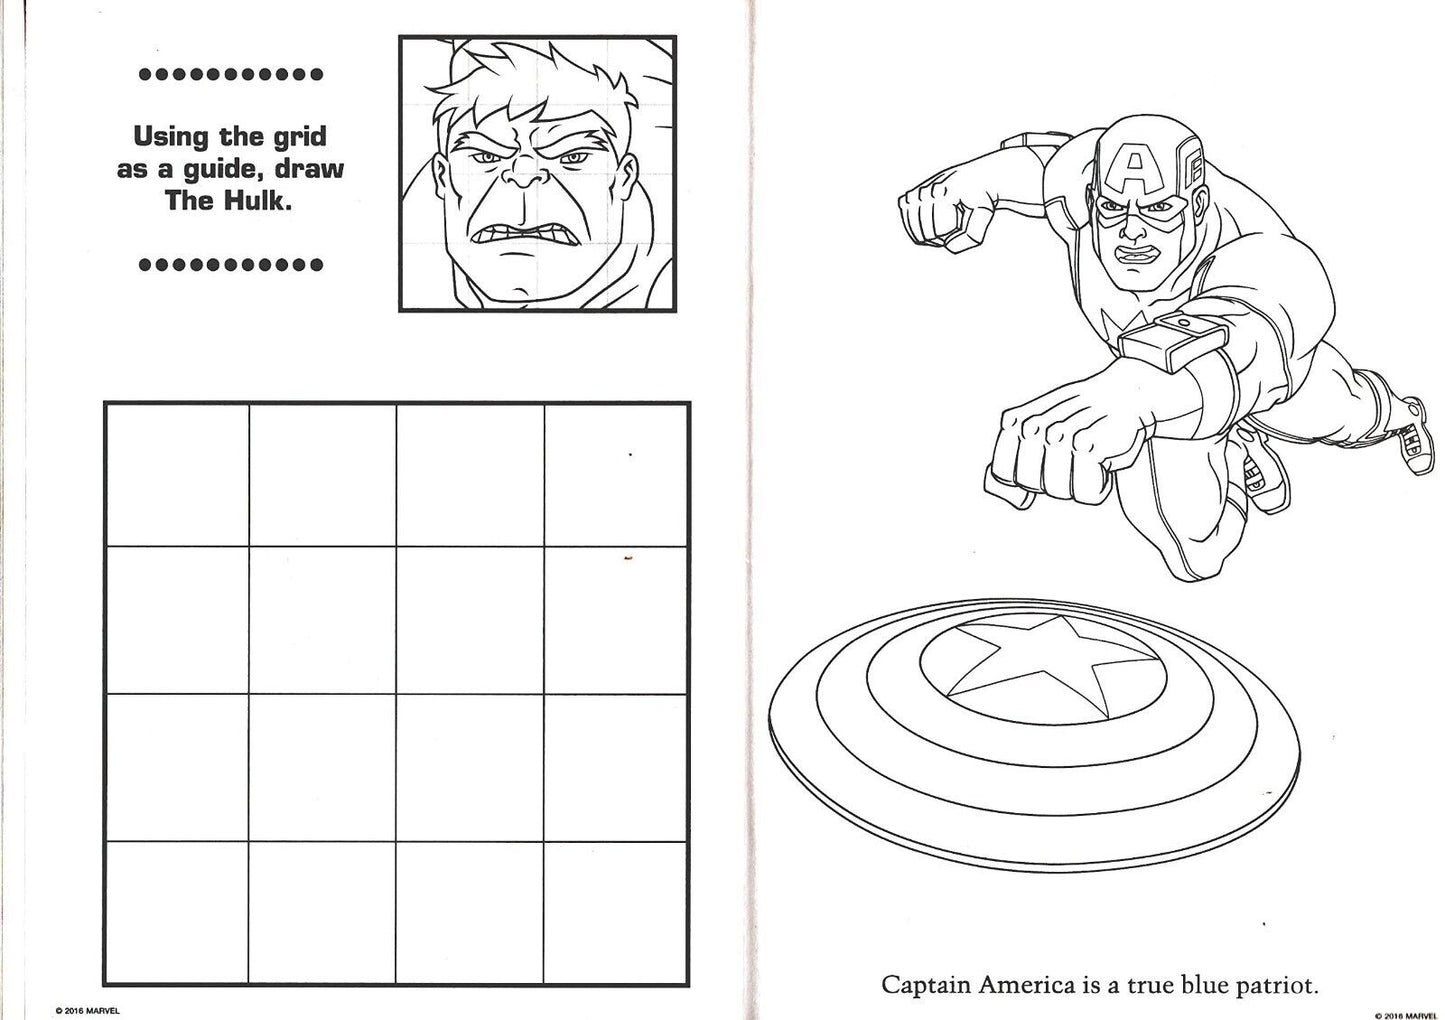 Marvel Avengers - Stars and Stripes - Jumbo Coloring & Activity Book